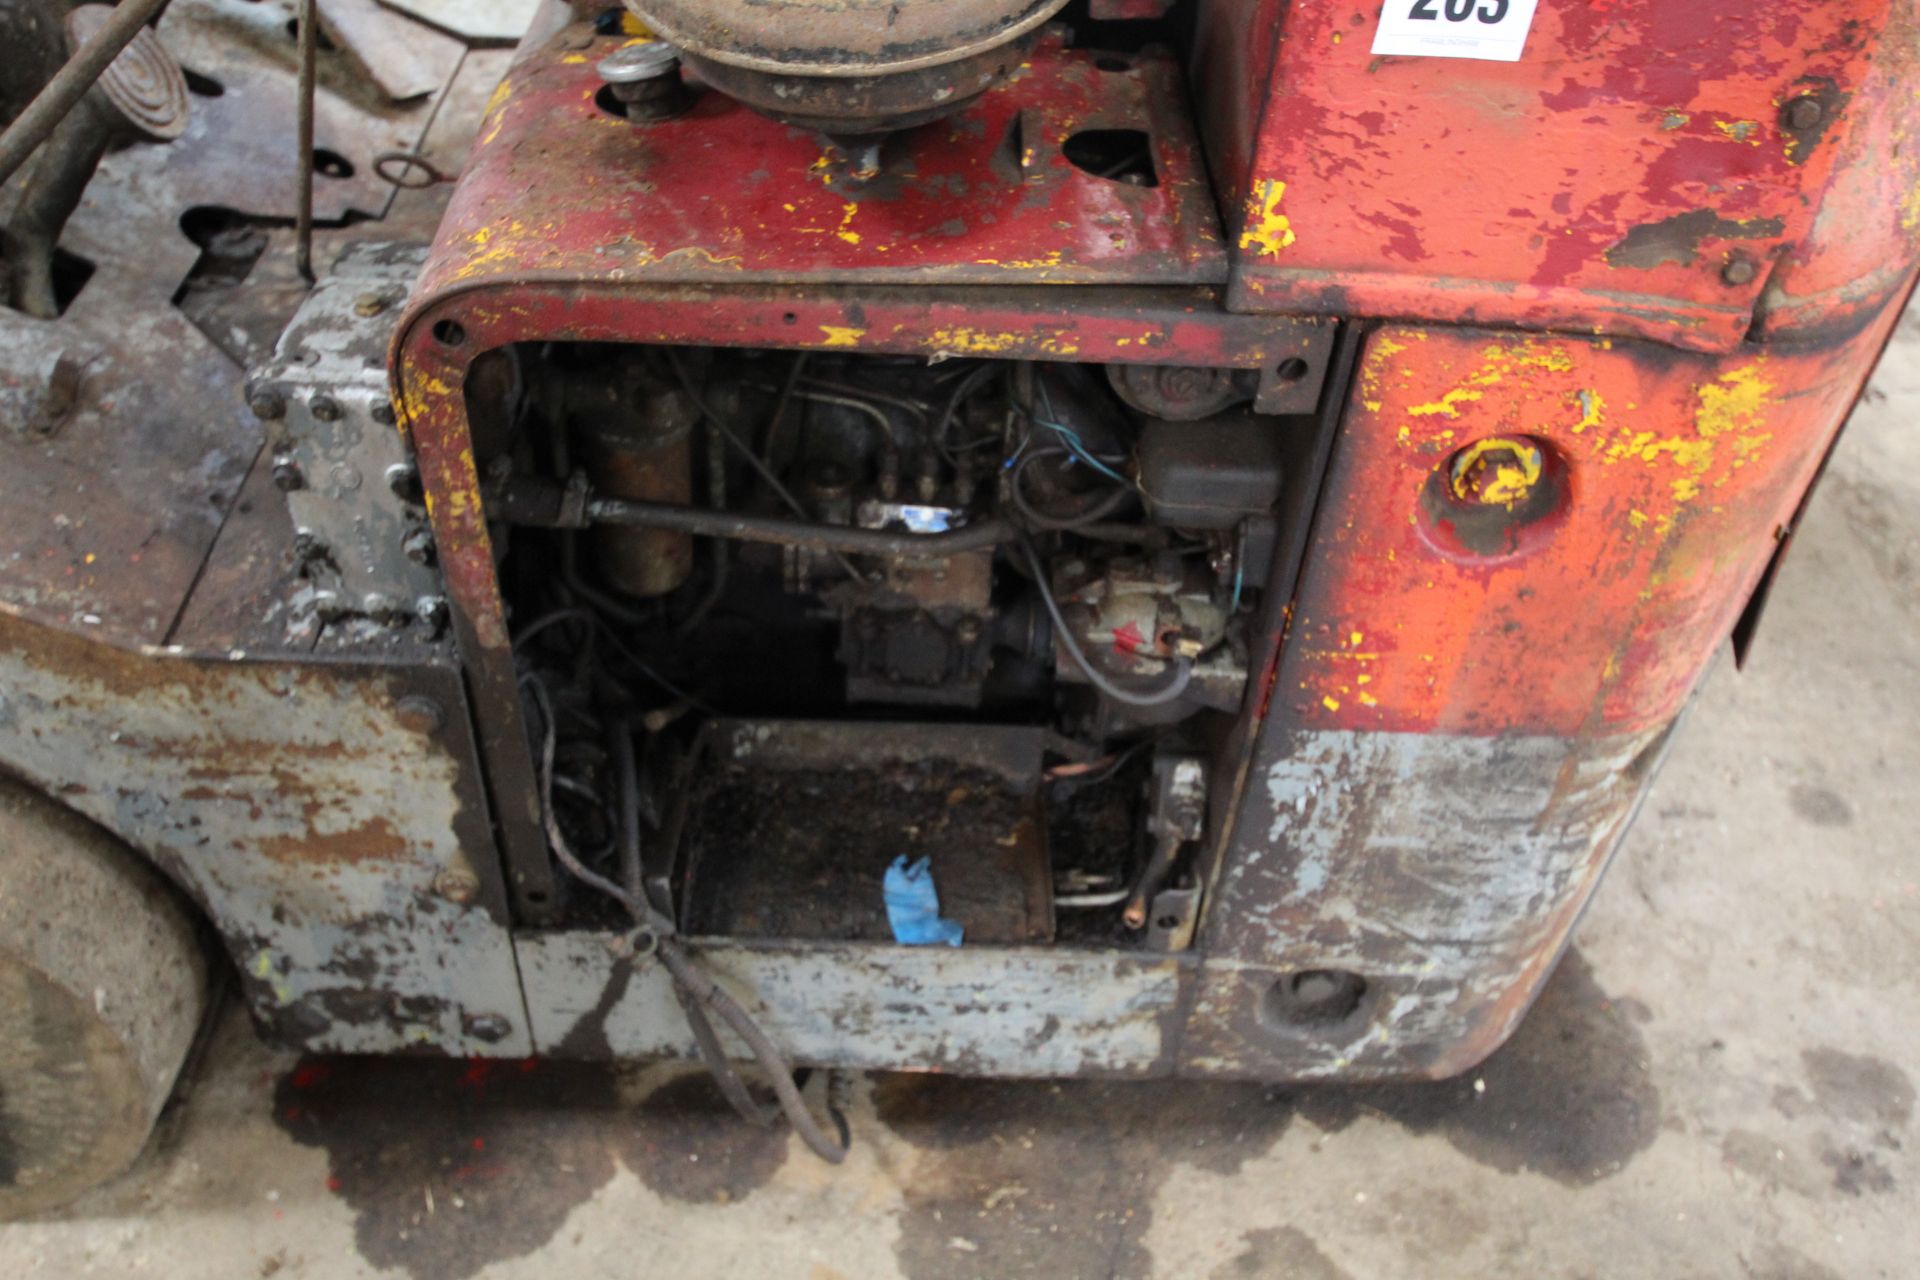 Coventry Climax Godiva diesel yard forklift. With three cylinder diesel engine. No battery. - Image 12 of 27